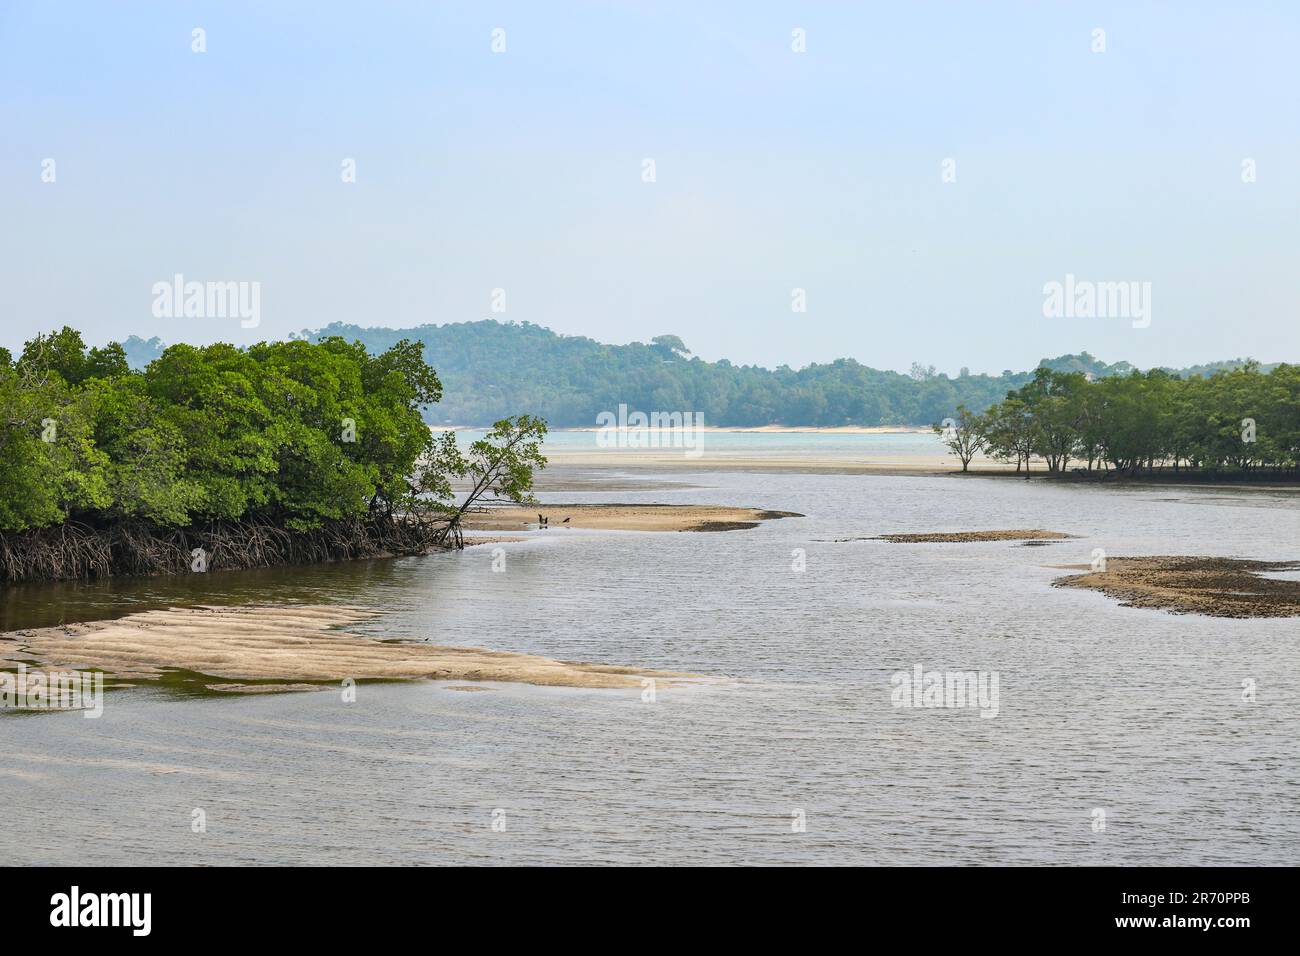 Mangrove trees along the banks of the river flowing into the Andaman Sea, Thailand. Water landscape. Stock Photo